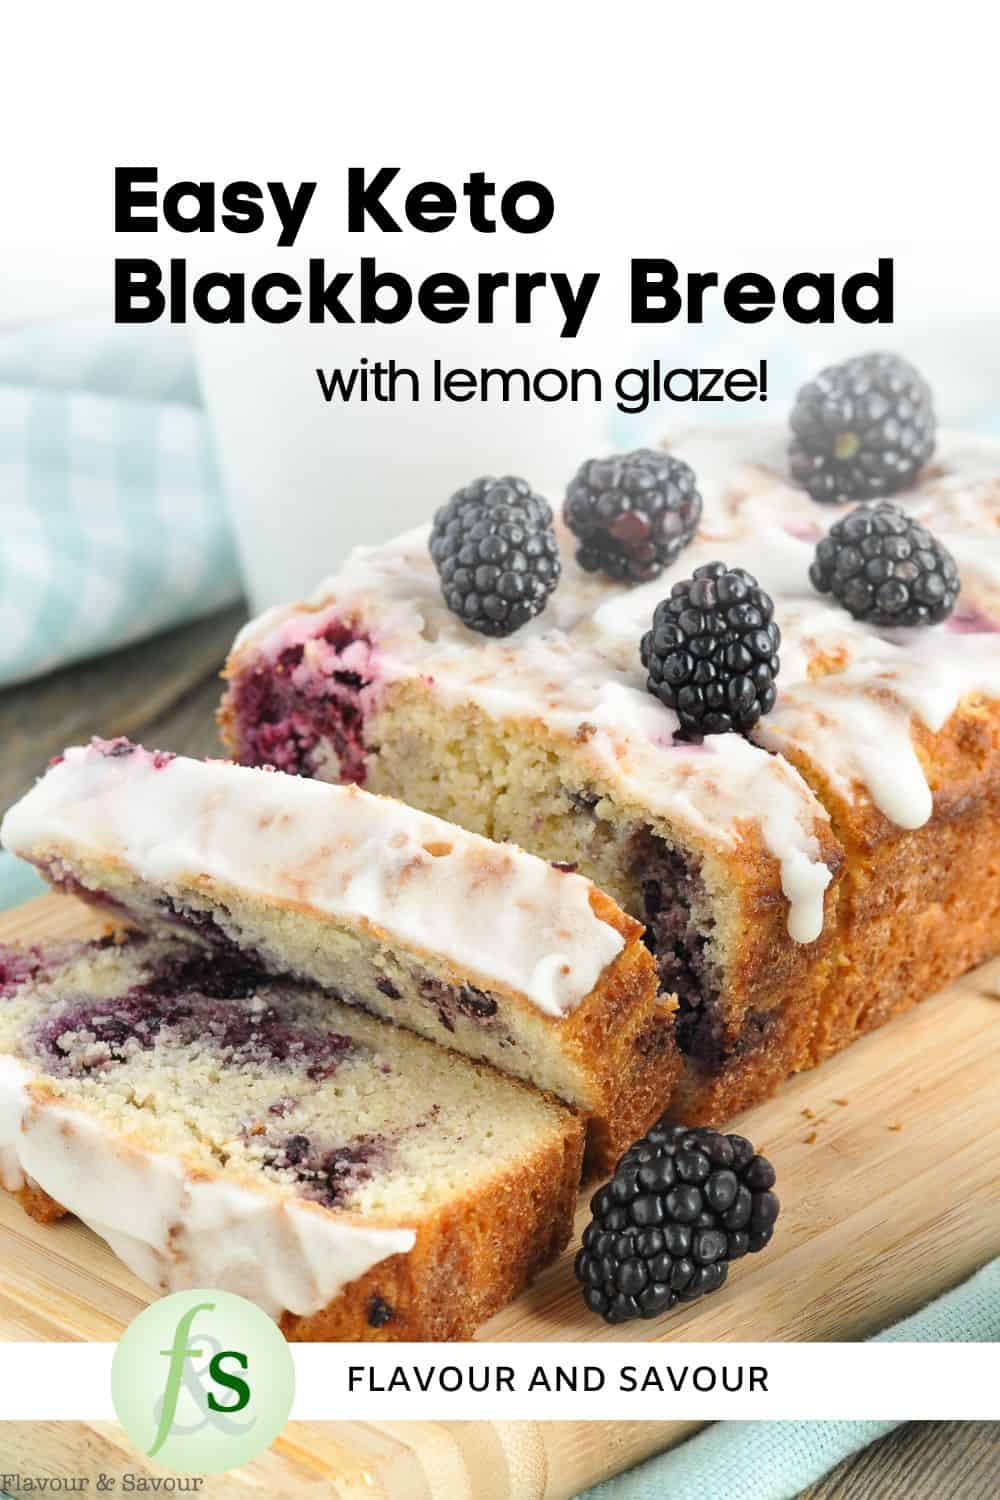 Image with text overlay for easy keto blackberry bread with lemon glaze.